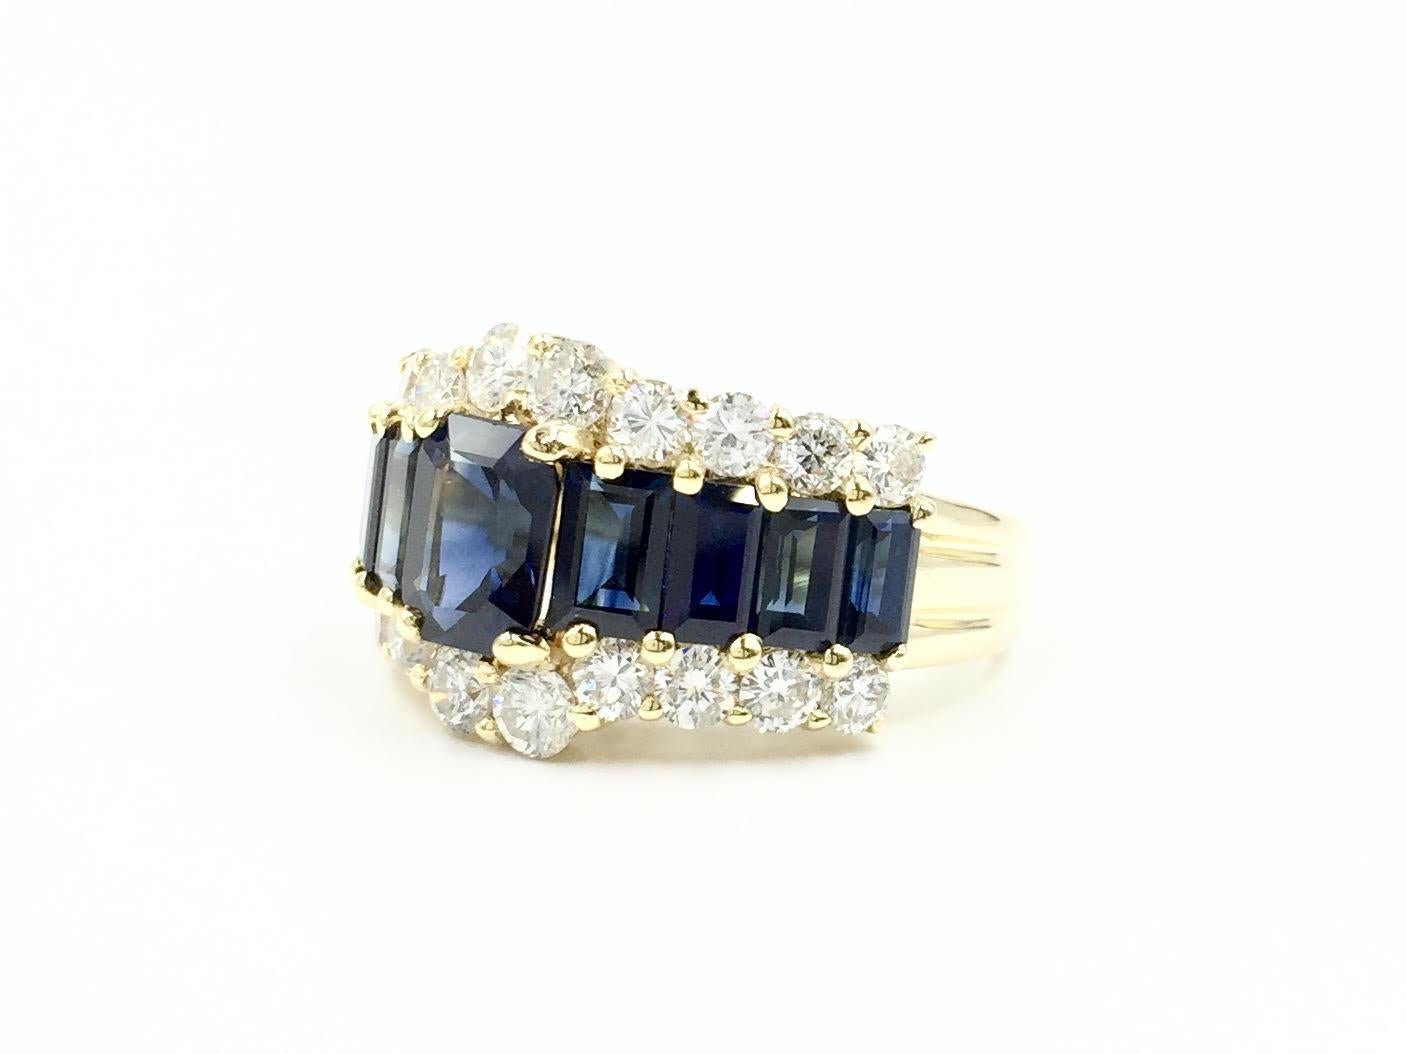 An incredibly beautiful ring with a classic design and high quality stones. This 18 karat gold ring features 5.09 carats of rich royal blue emerald cut sapphires and 1.47 carats of bright round brilliant diamonds. Diamond quality is approximately F